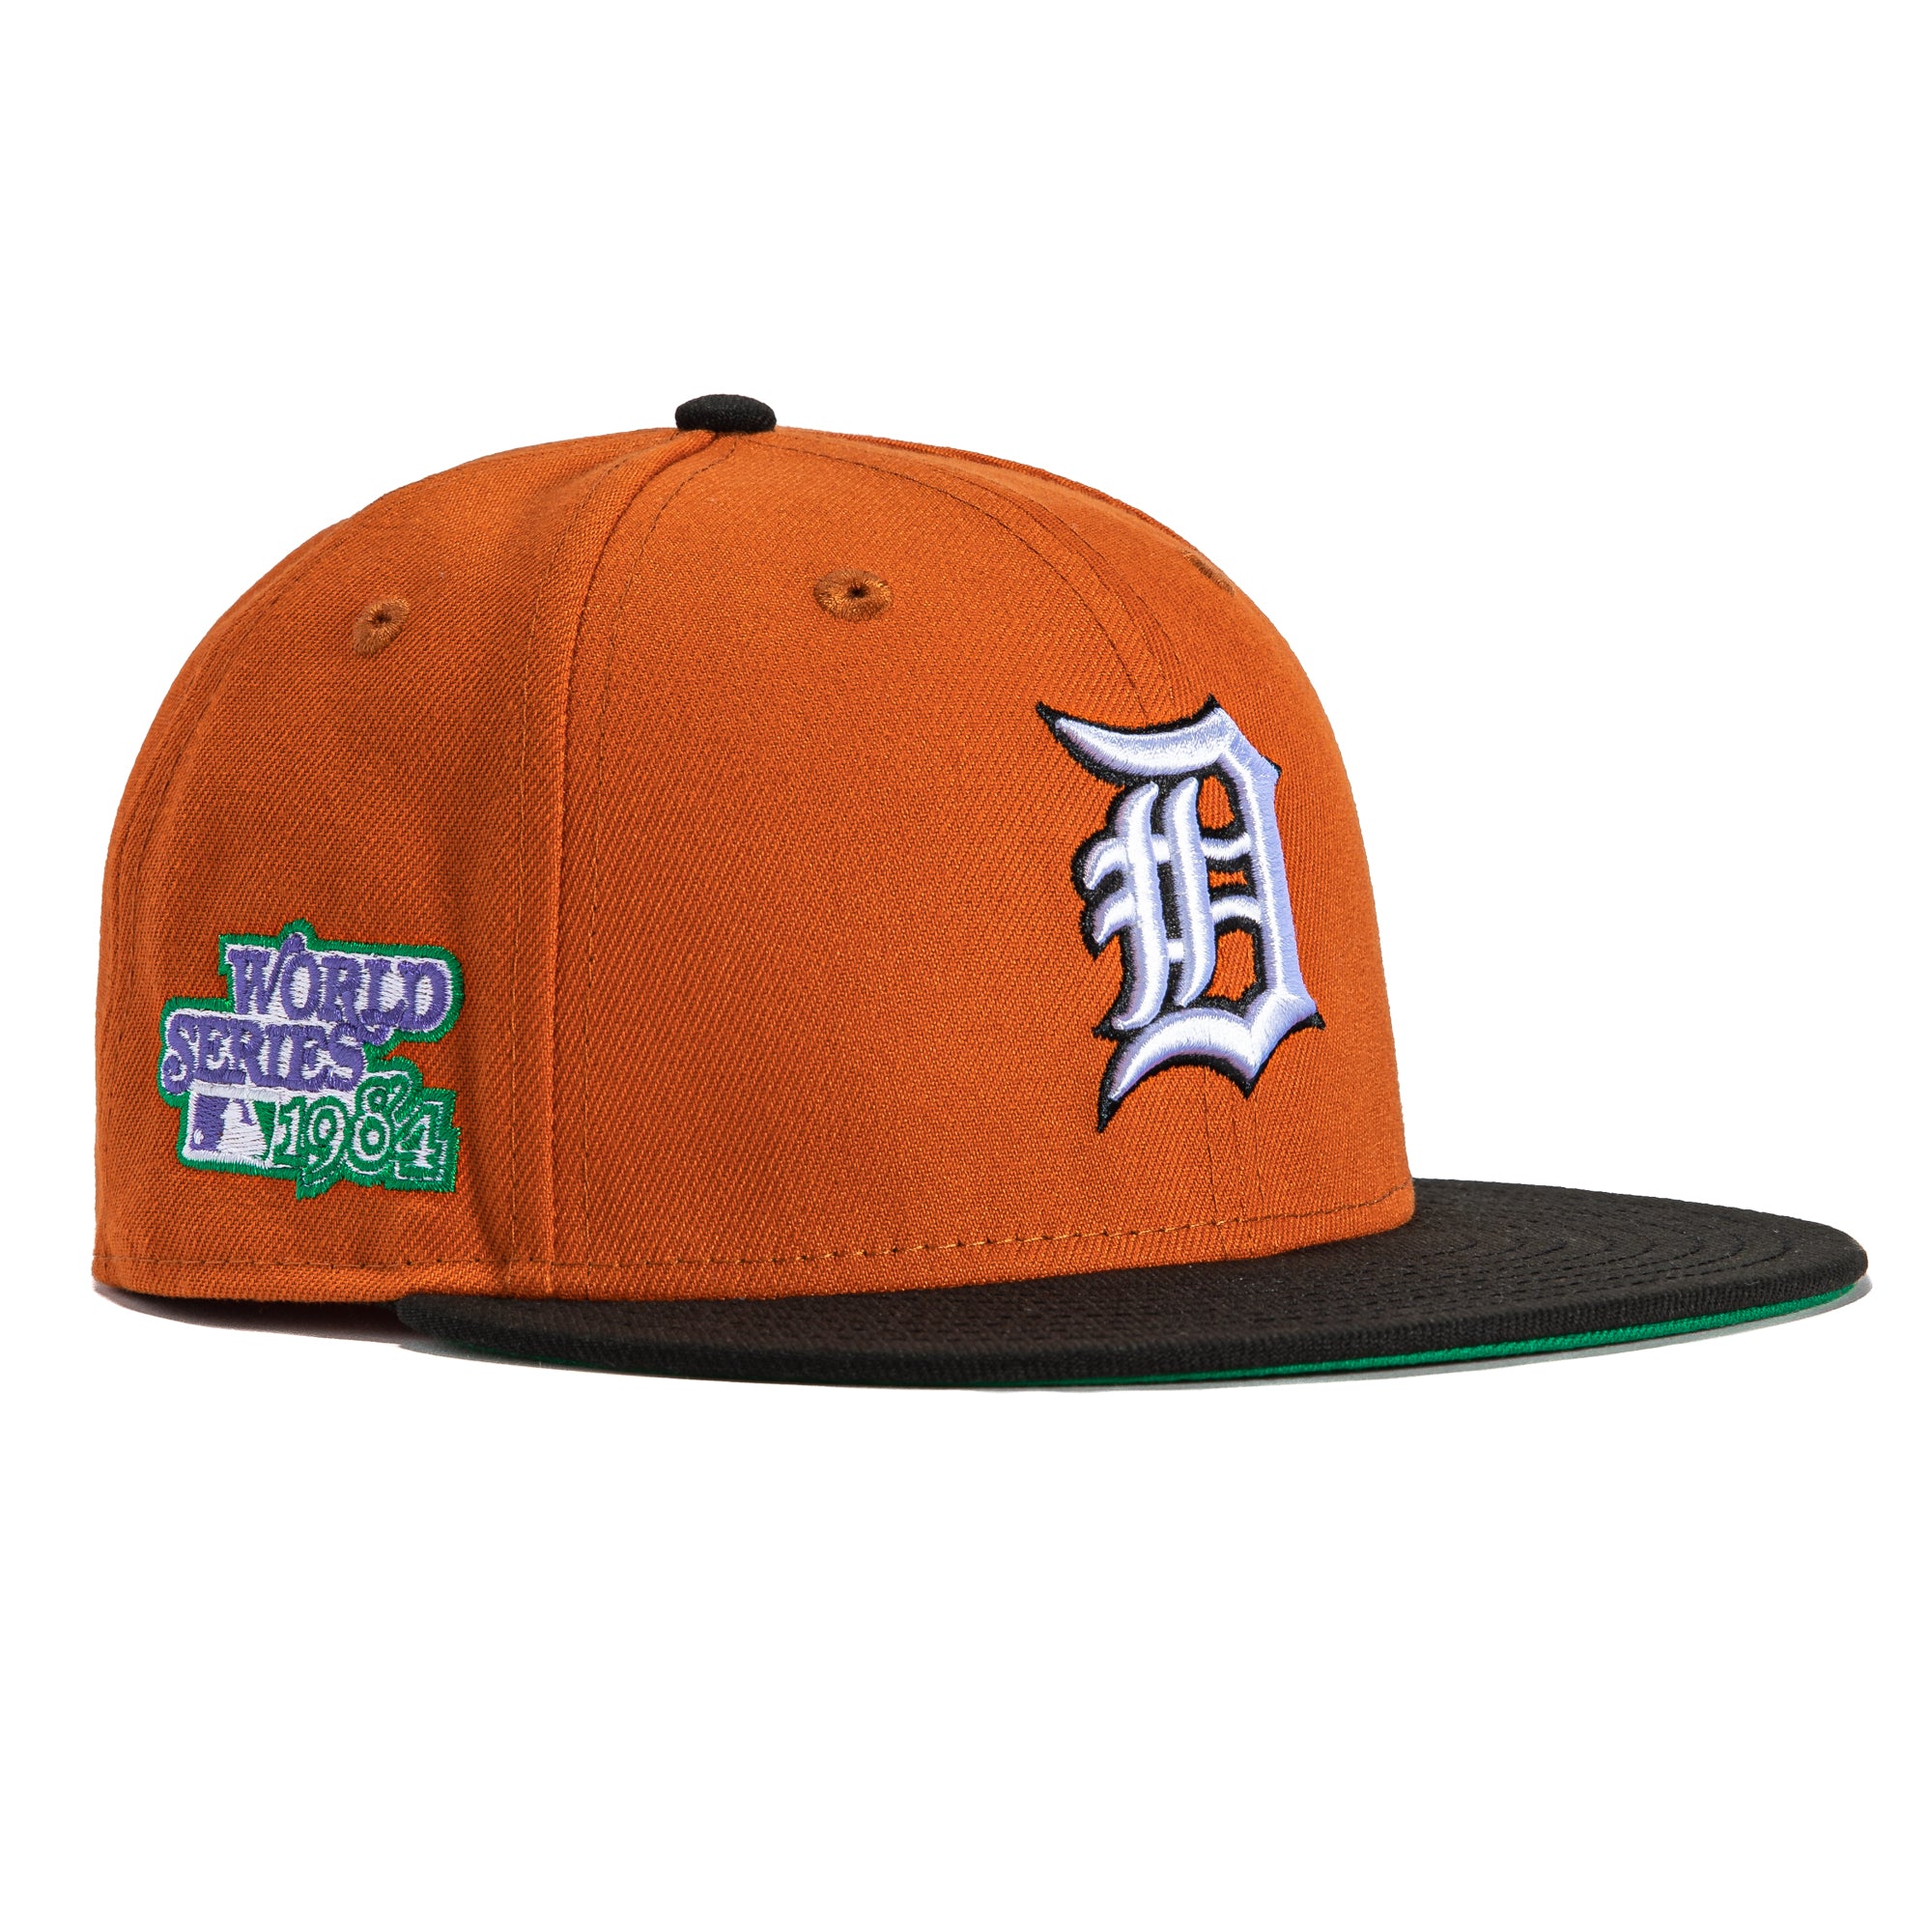 EXCLUSIVE New Era 59FIFTY DETROIT TIGERS STADIUM PATCH HAT, Size 7 3/8, W/  PIN